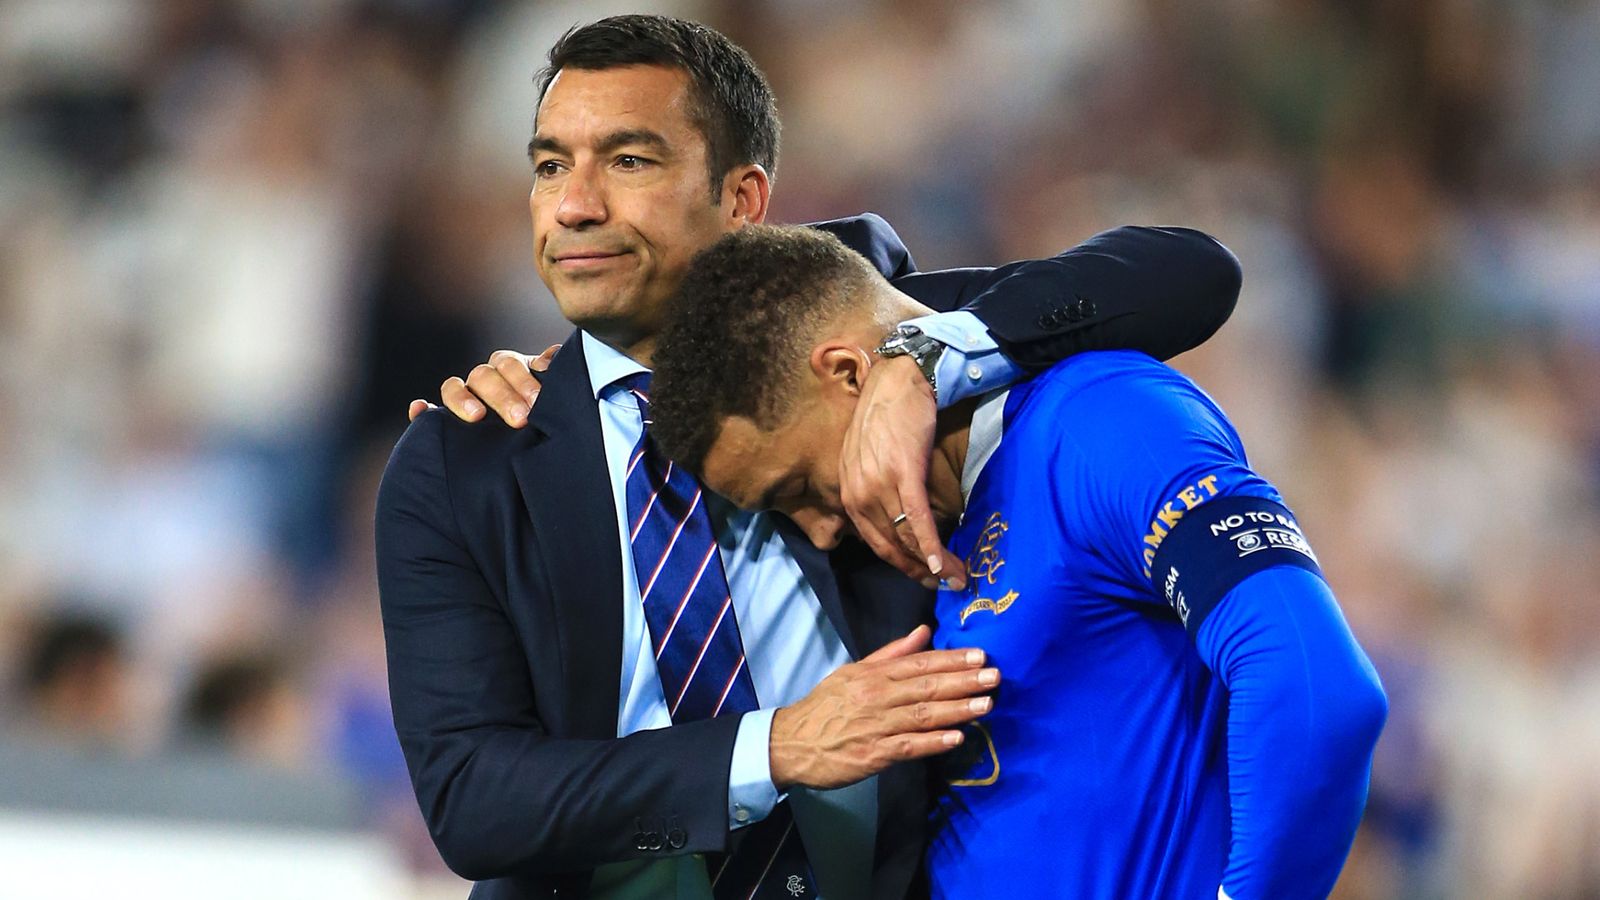 Rangers boss Giovanni van Bronckhorst says 'it will be tough' to pick players up for Scottish Cup final after Europa League heartbreak